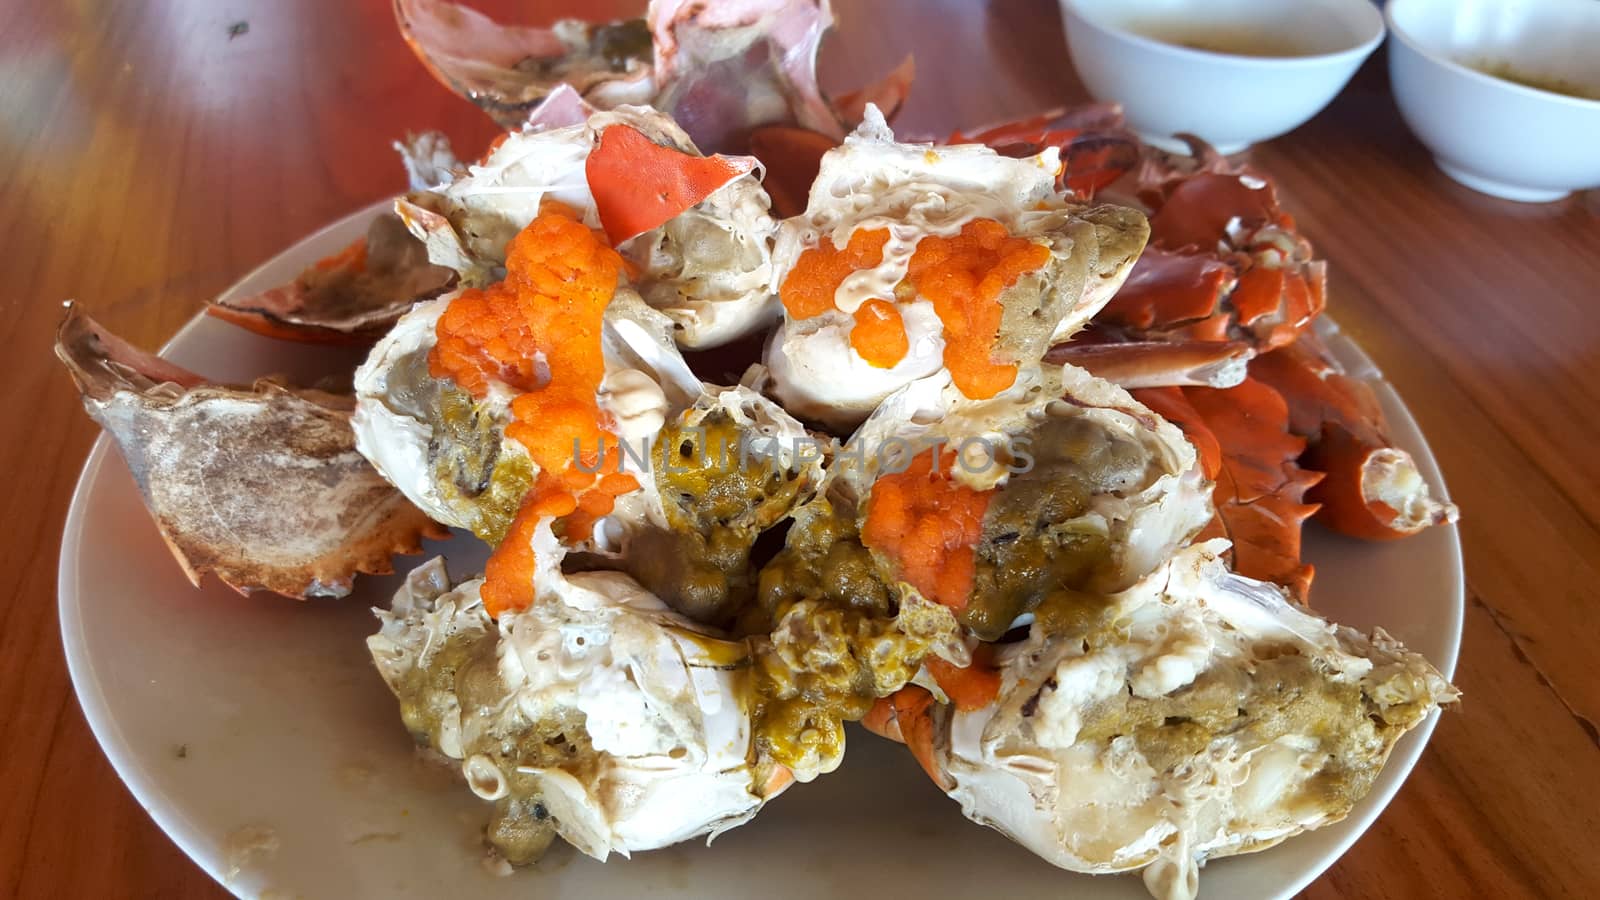 Steamed crab legs , seafood, thai style by pumppump